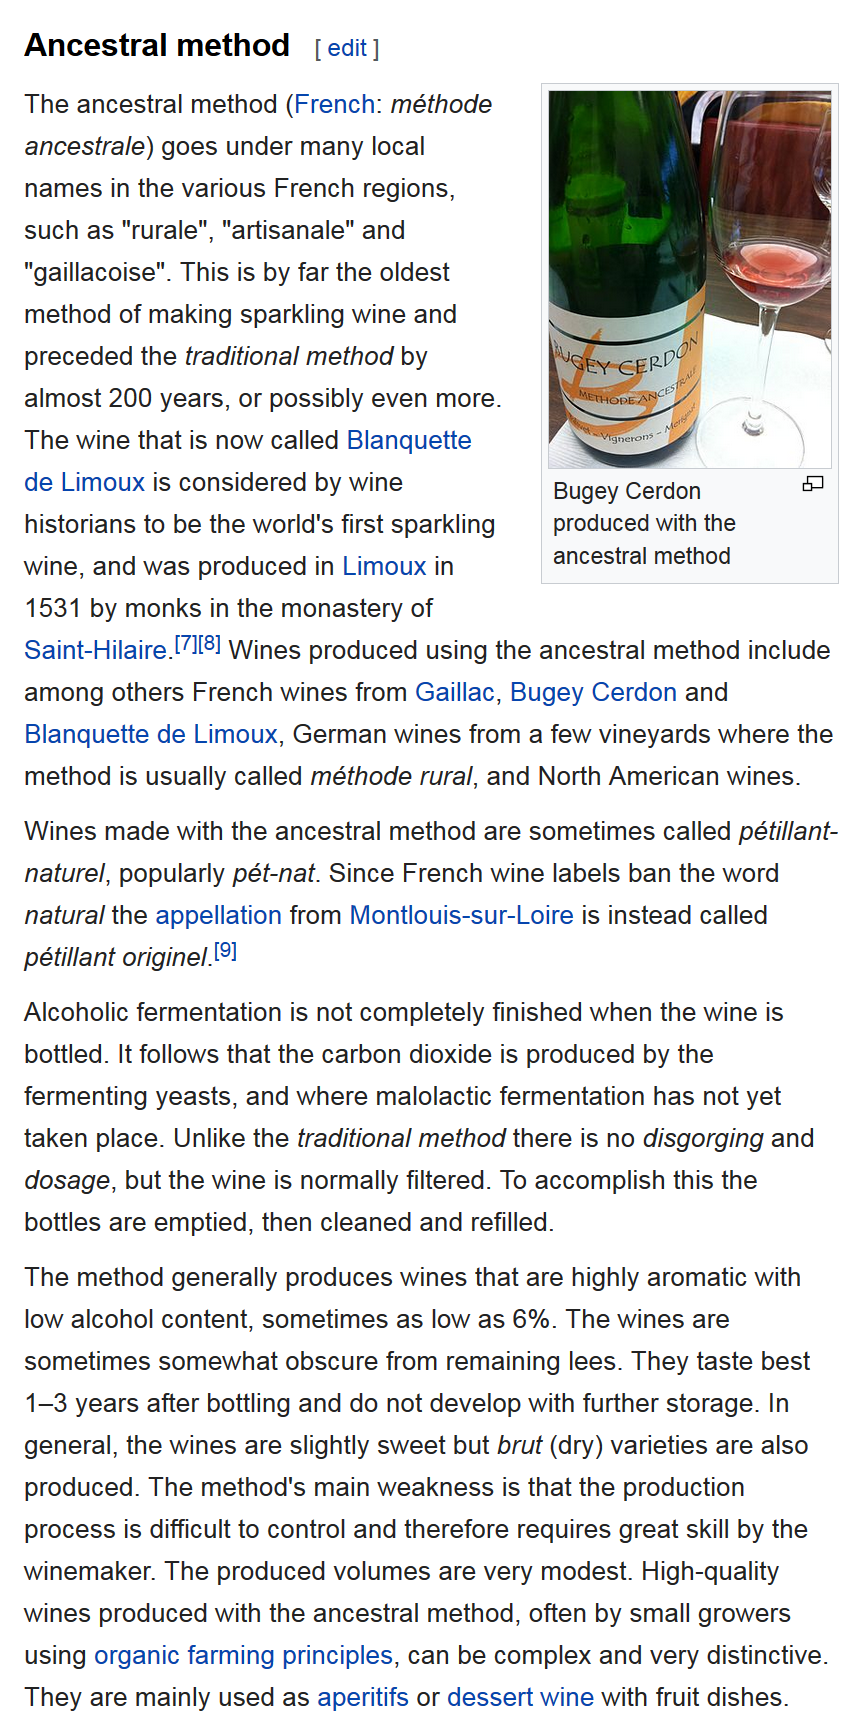 ancestral-method_WIKIPEDIA.png